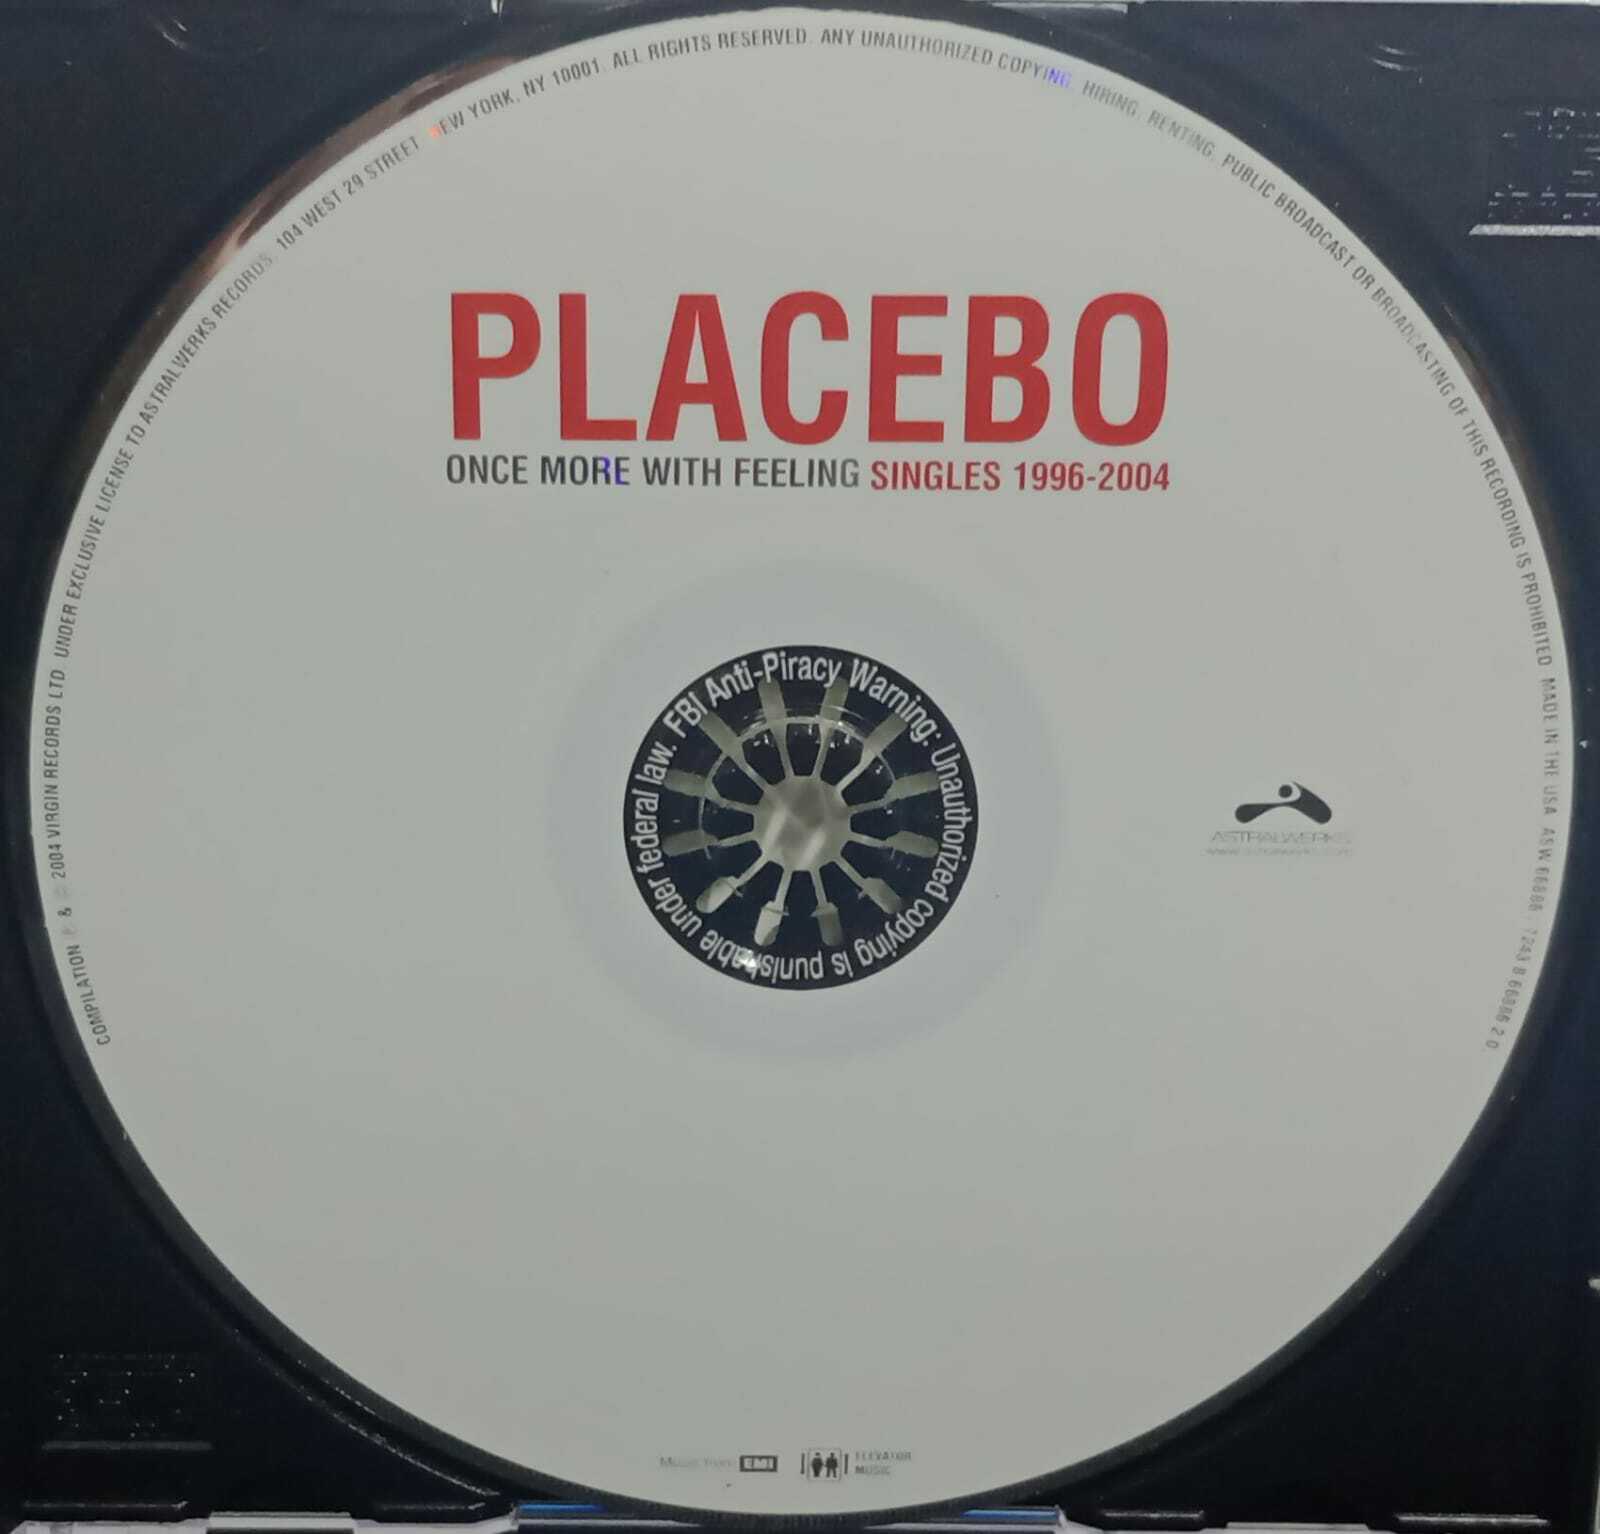 CD - Placebo - Once More with Feeling Singles 1996-2004 (usa)